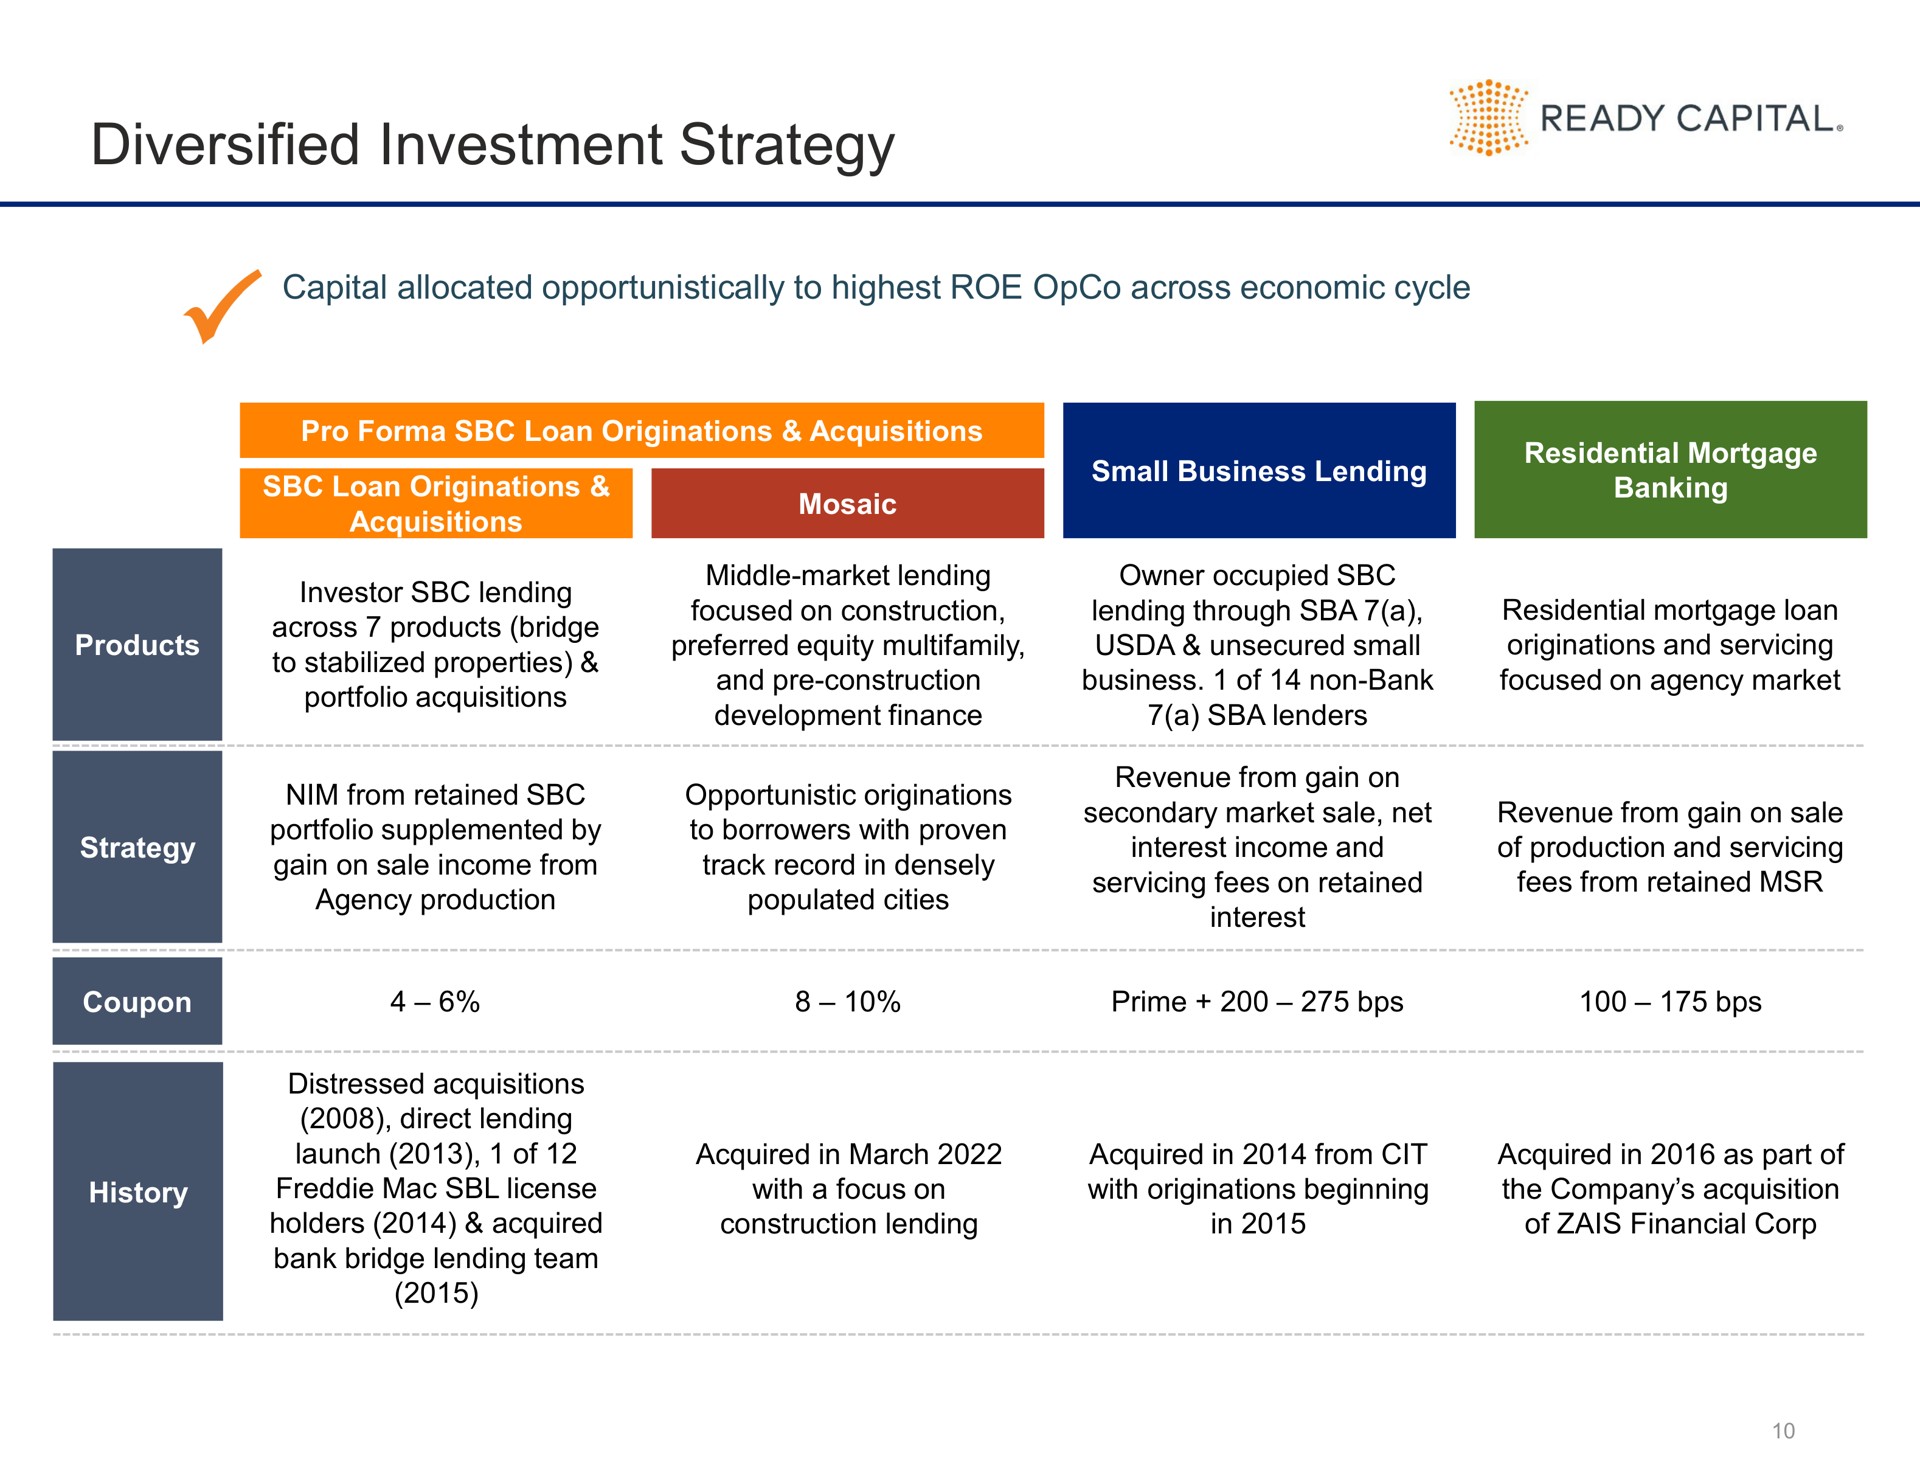 diversified investment strategy ready capitan | Ready Capital